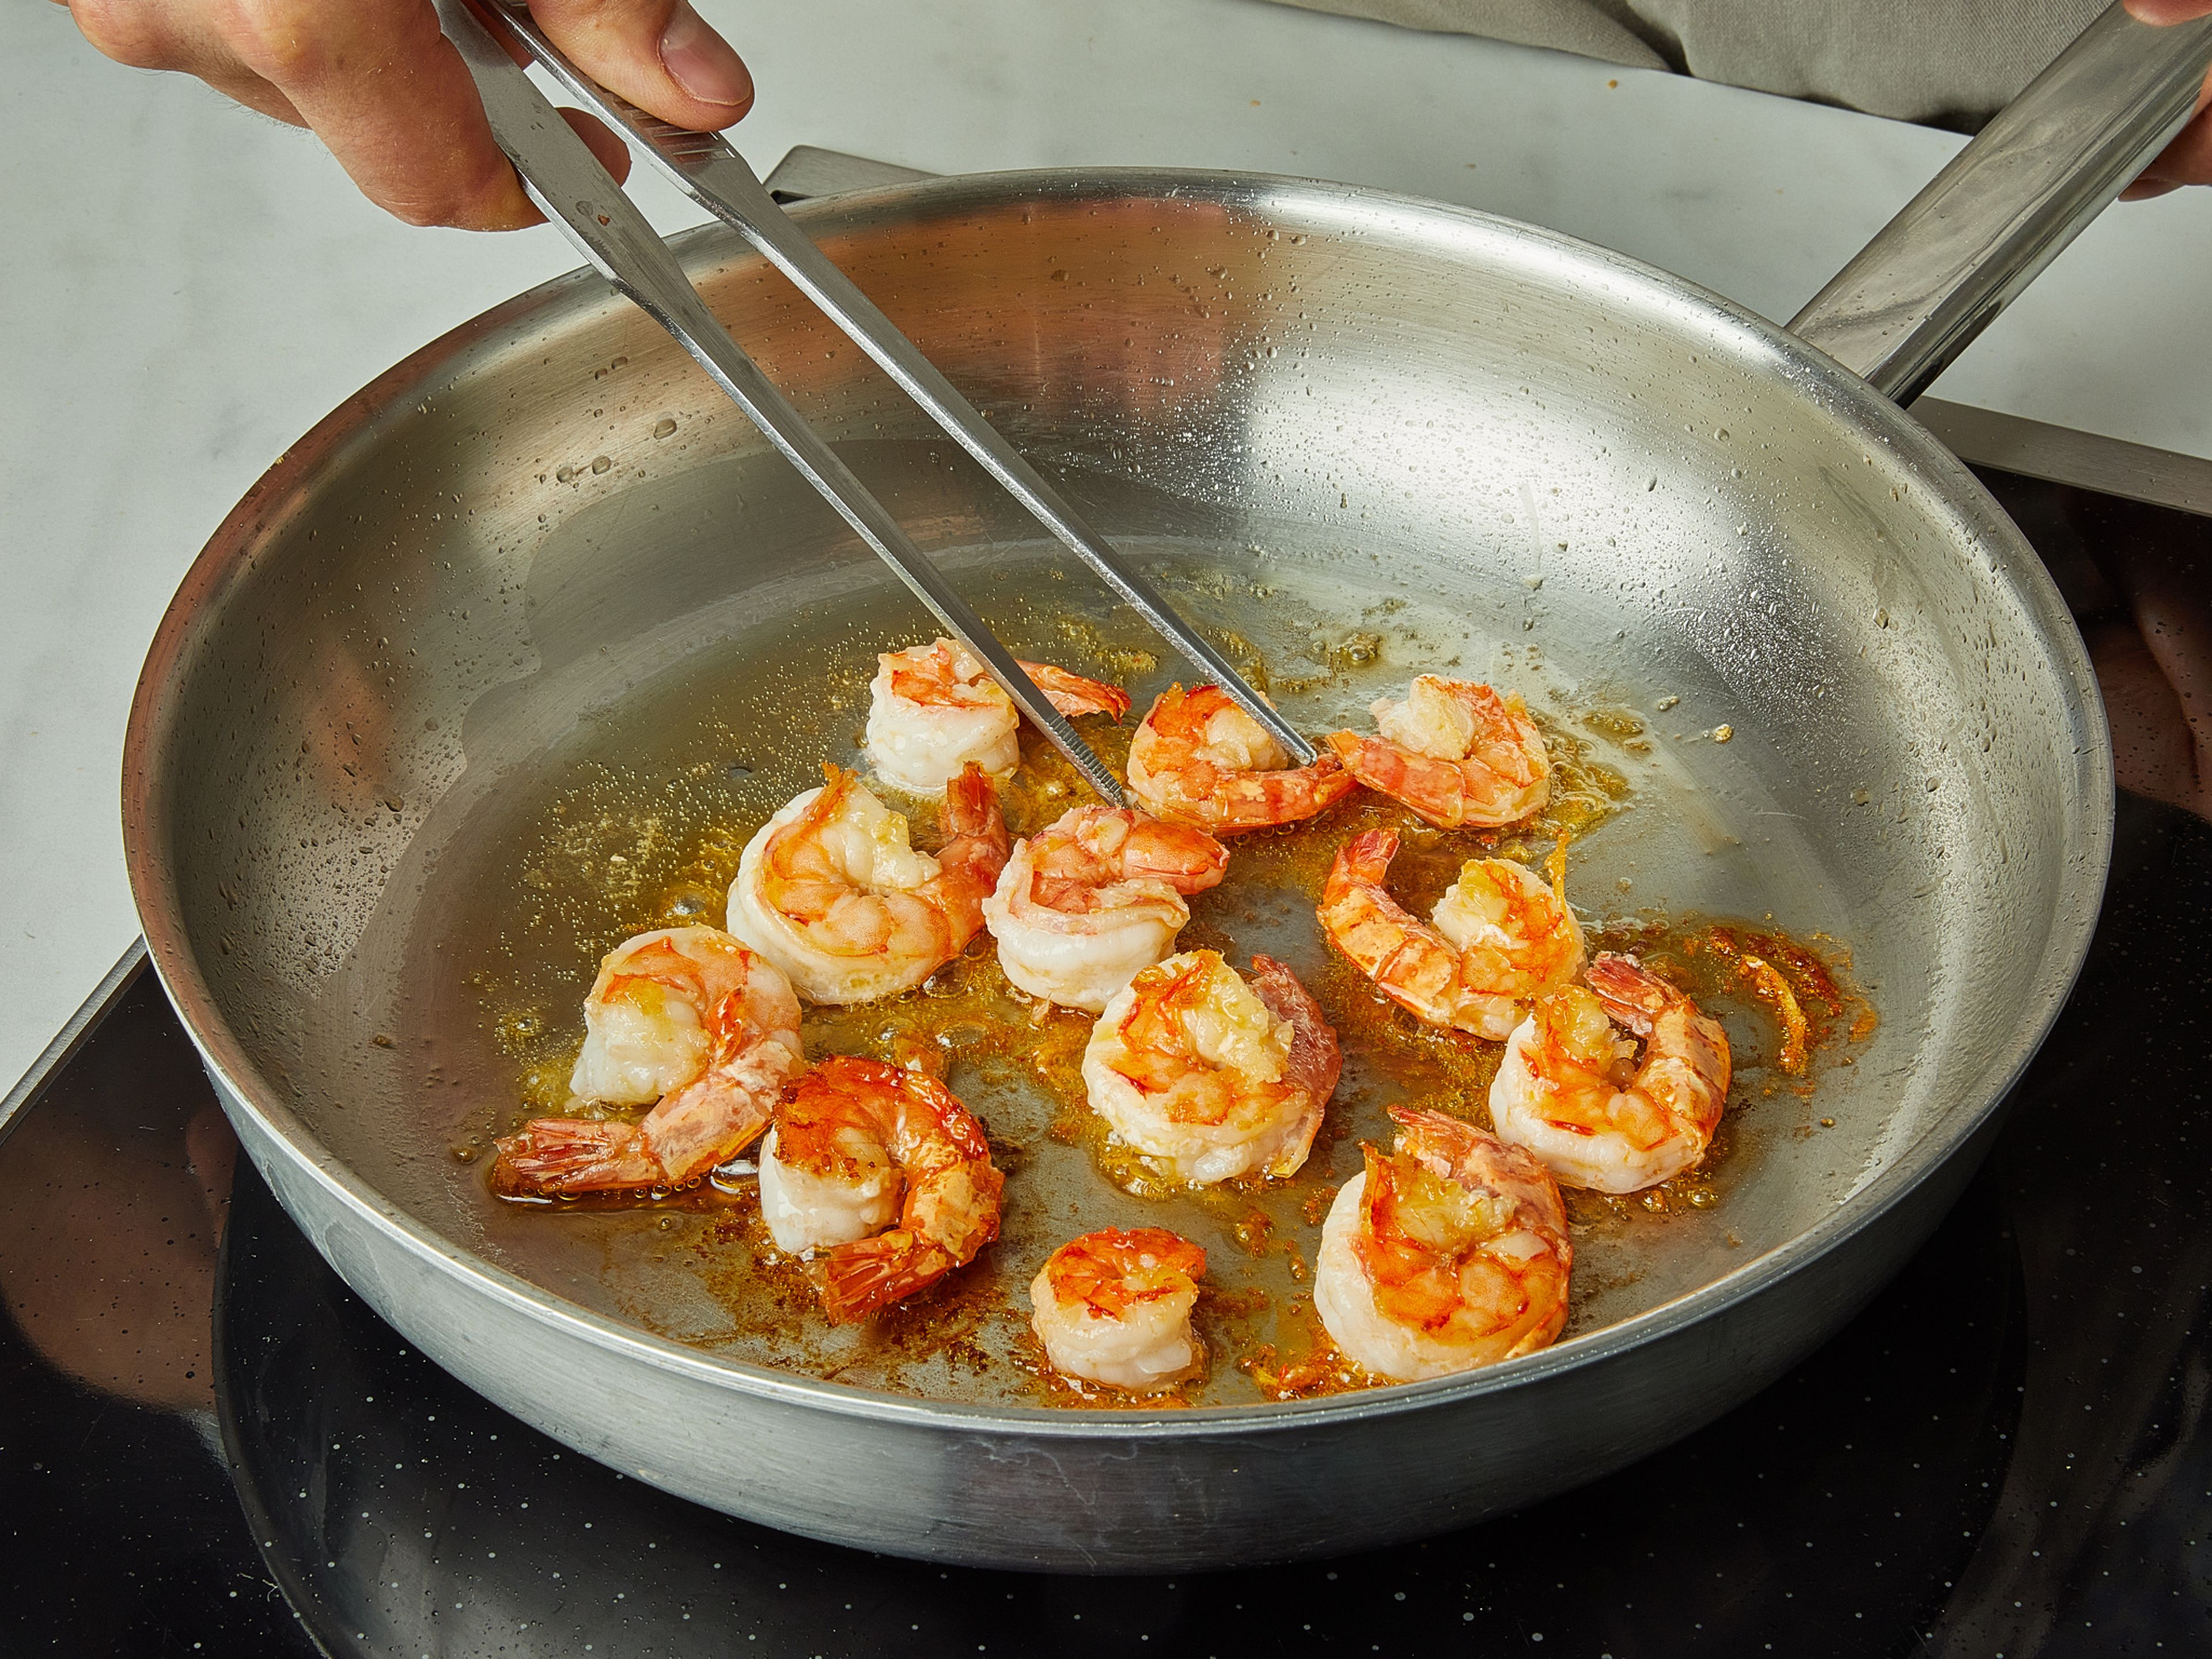 Peel and slice the garlic. Halve the cherry tomatoes. Remove the seeds from the chili and slice thinly. Heat half of the olive oil in a large pan and sear the shrimp for approx. 1 min. on each side. Remove shrimp from the pan and set it aside in a small bowl.